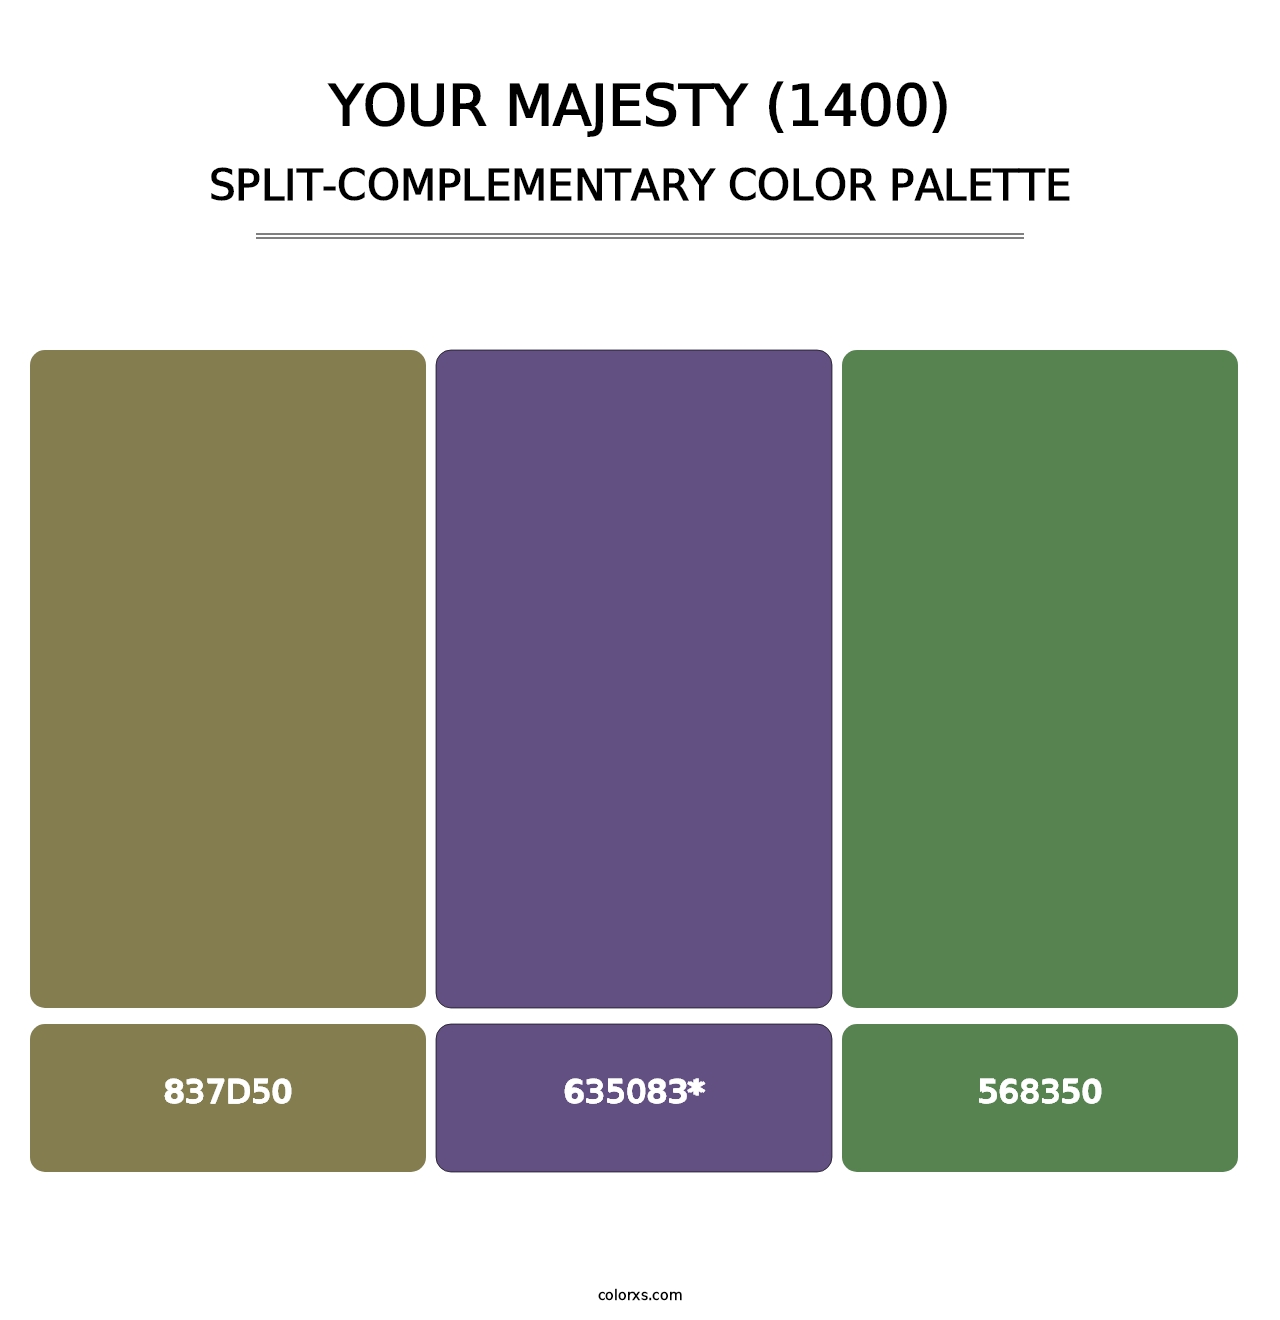 Your Majesty (1400) - Split-Complementary Color Palette